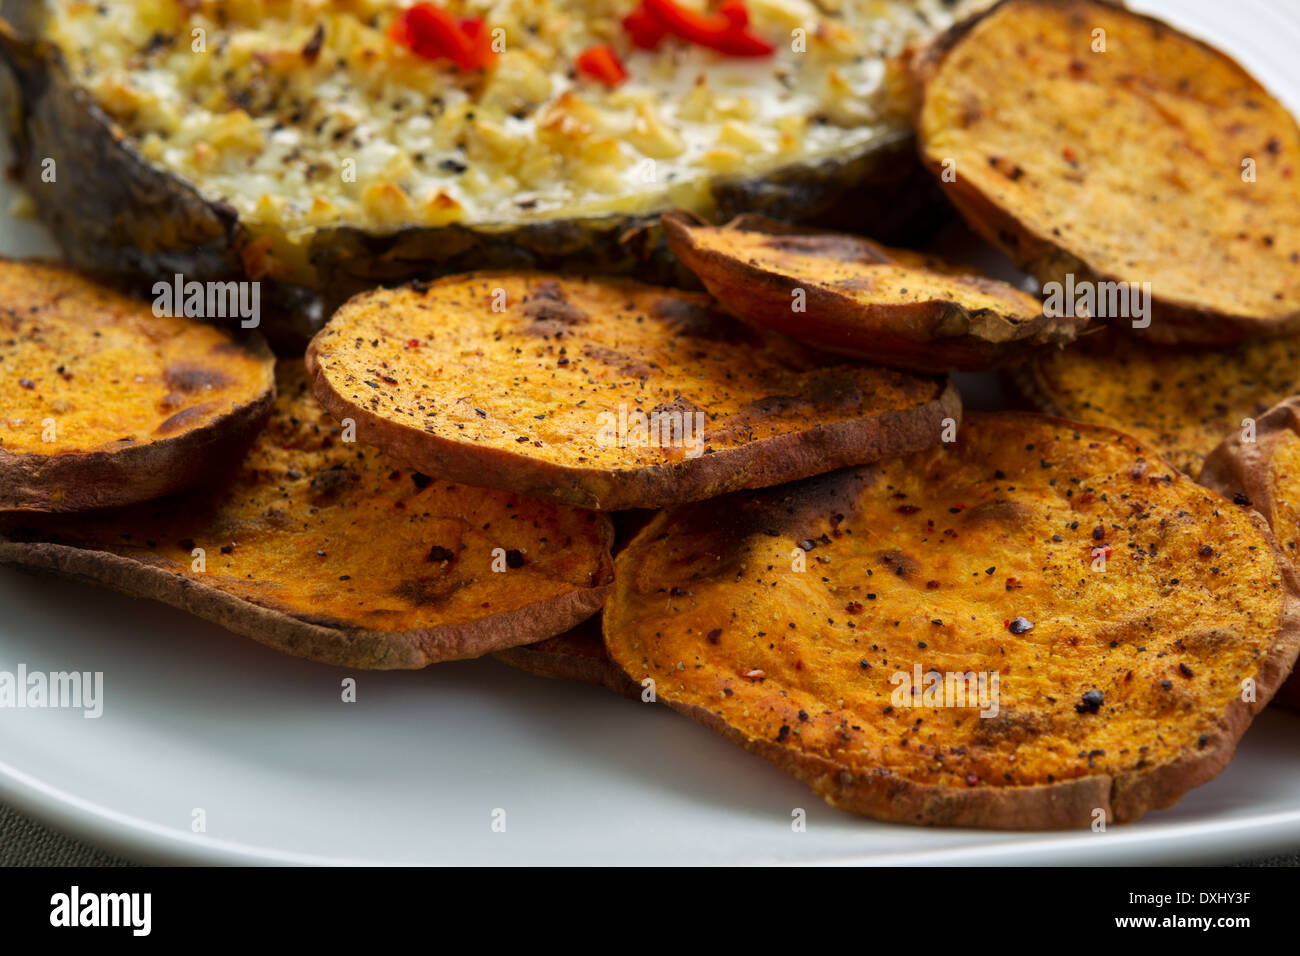 Horizontal closeup photo of baked yam slices and fish on white plate Stock Photo